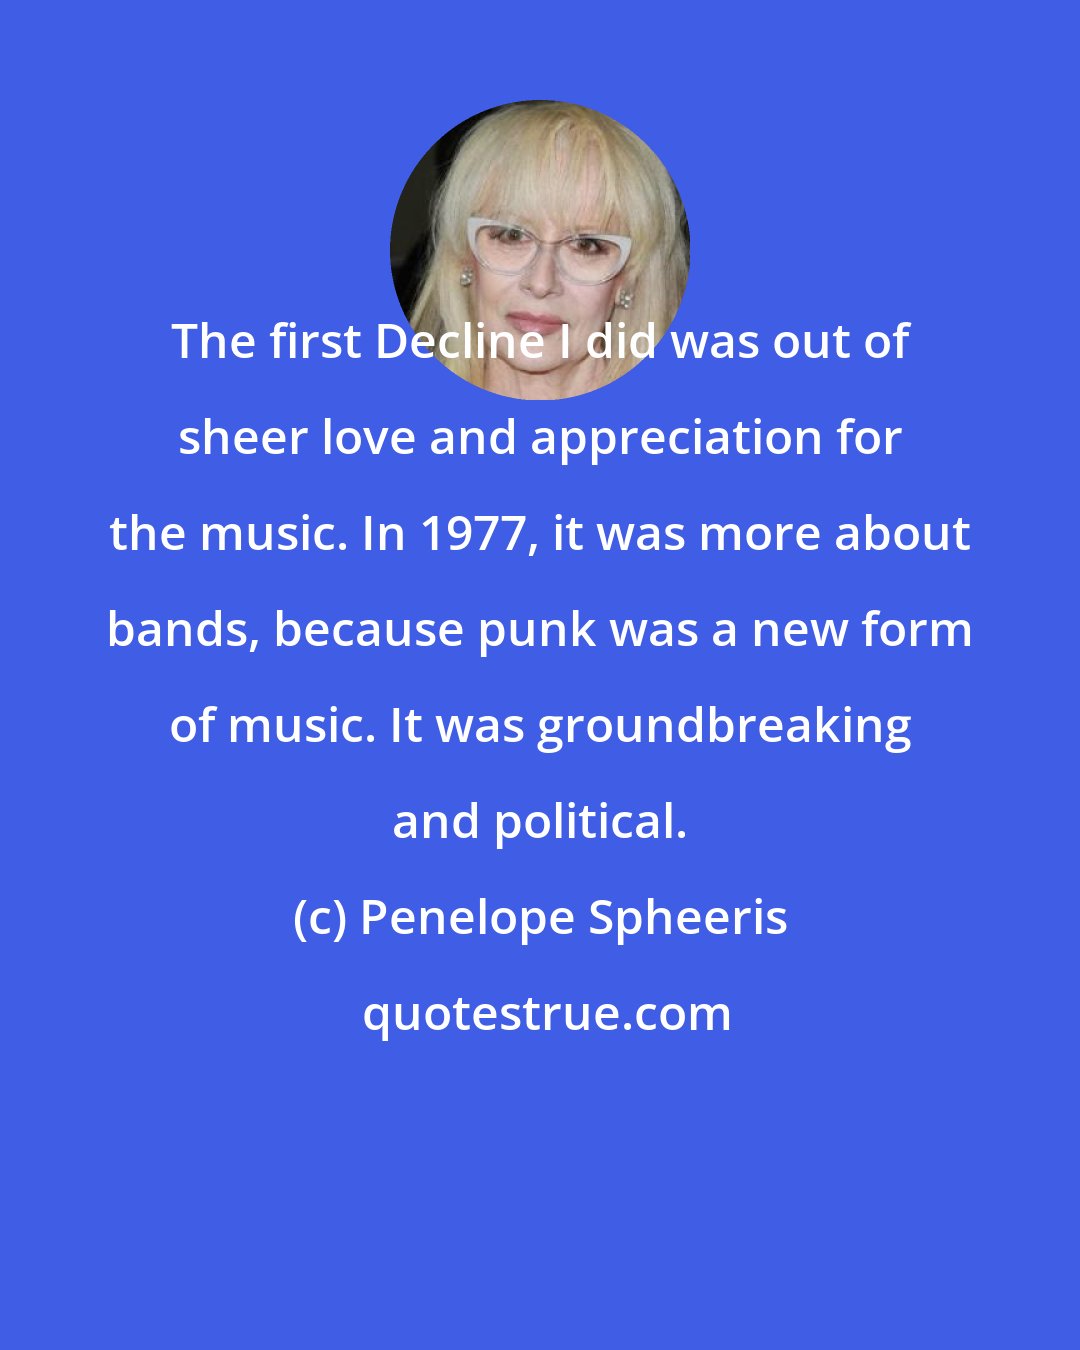 Penelope Spheeris: The first Decline I did was out of sheer love and appreciation for the music. In 1977, it was more about bands, because punk was a new form of music. It was groundbreaking and political.